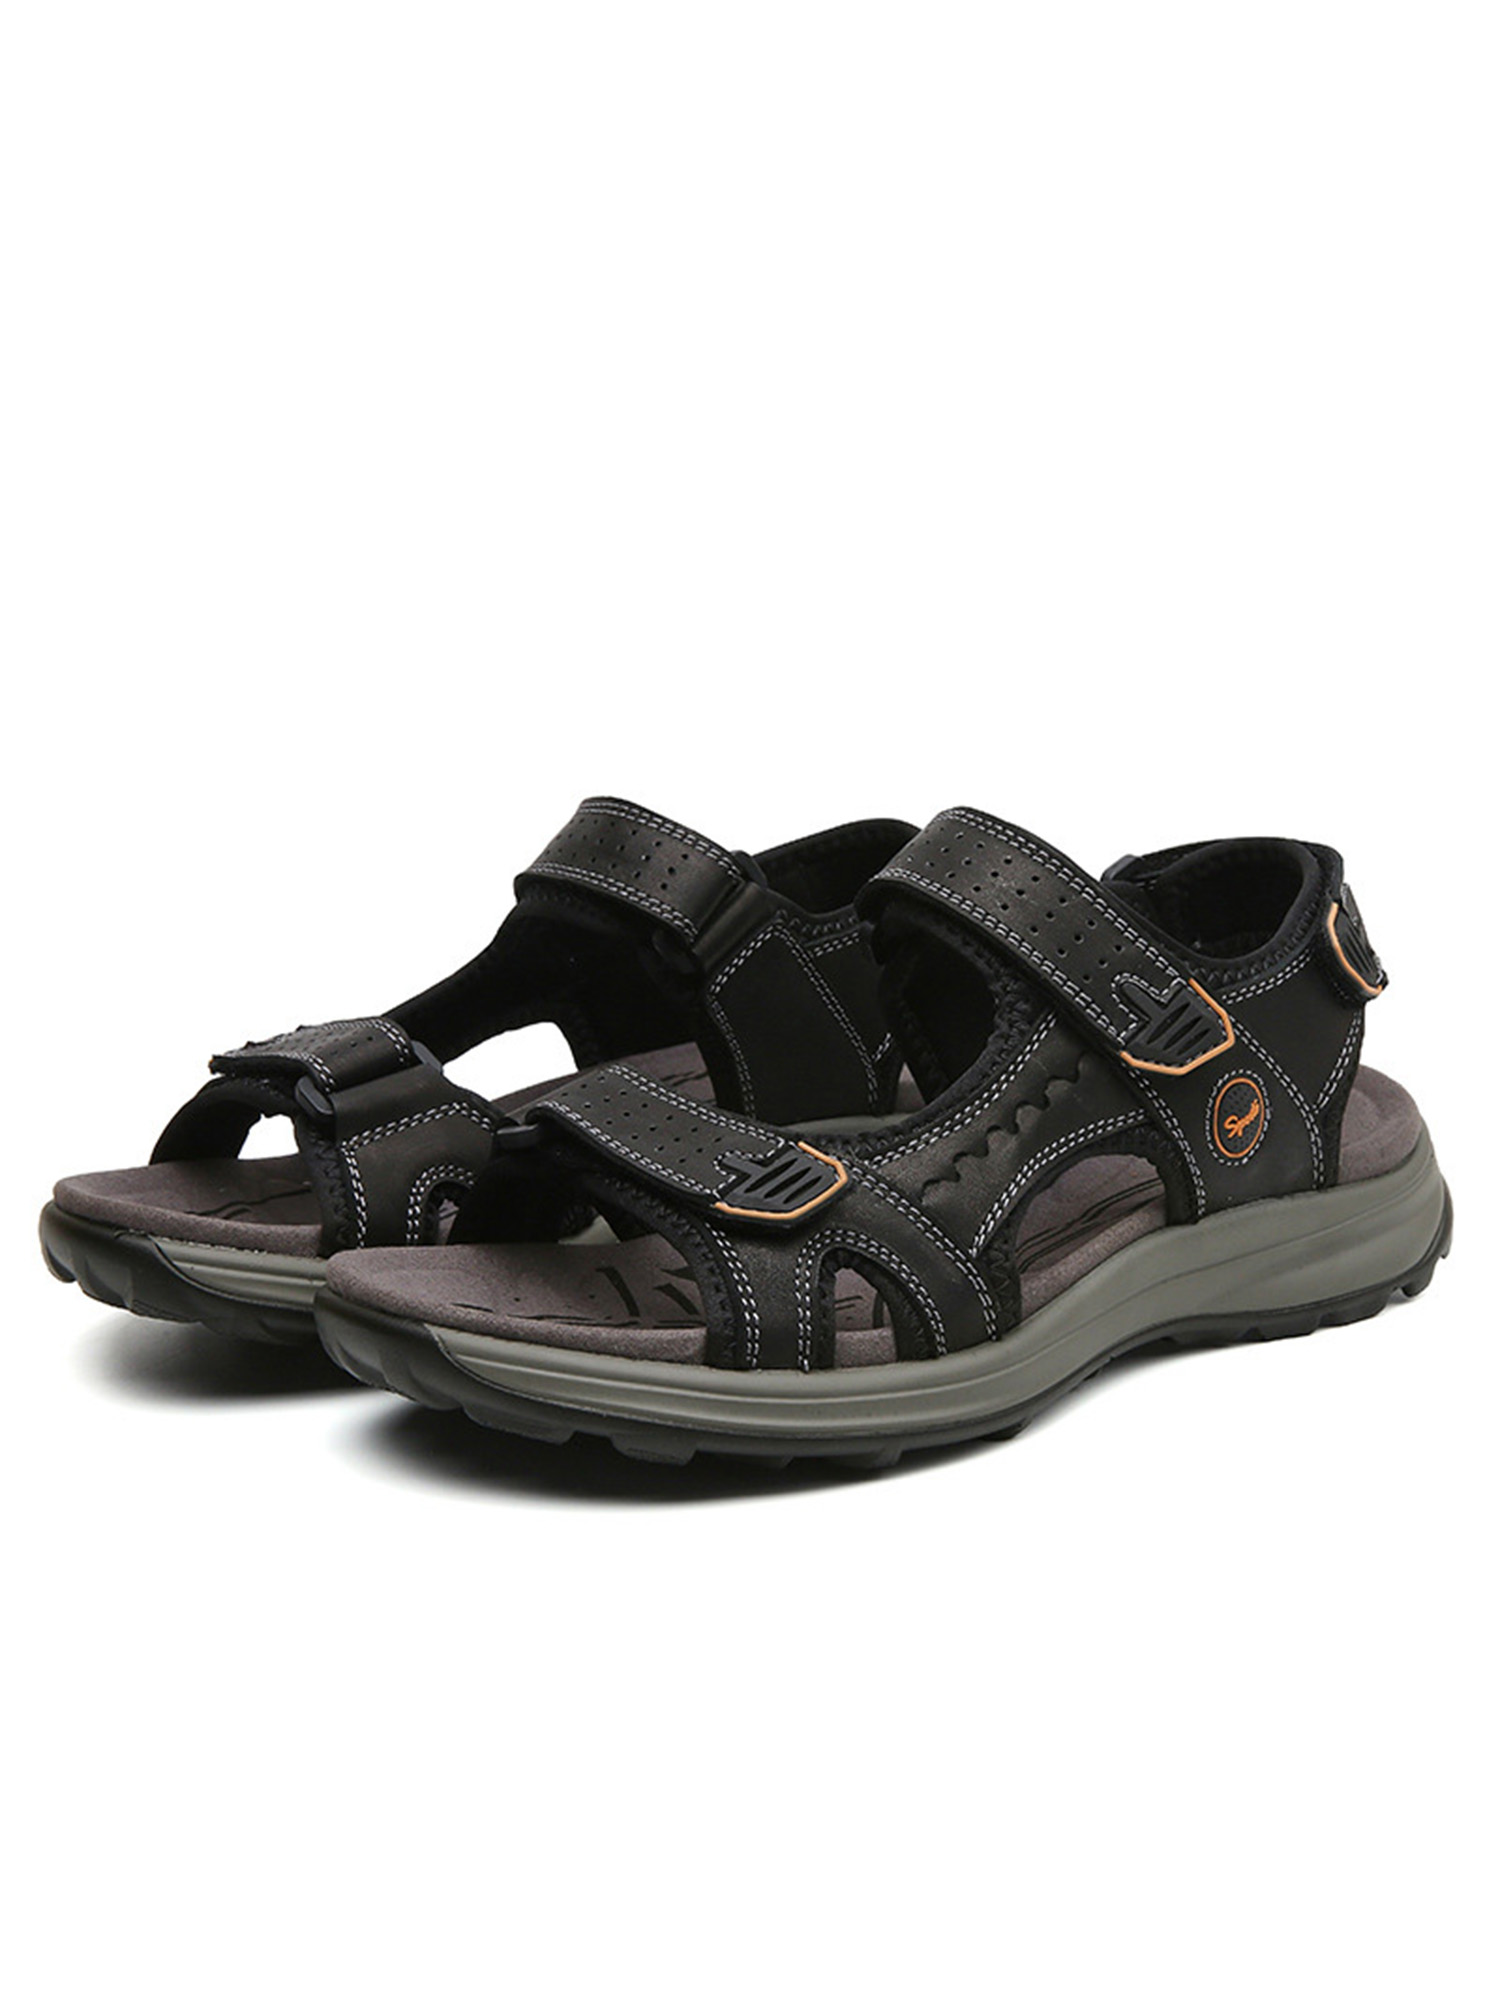 Audeban Men's Outdoor Hiking Sandals, Open Toe Arch Support Strap Water Sandals, Lightweight Athletic Trail Sport Sandals - image 1 of 5